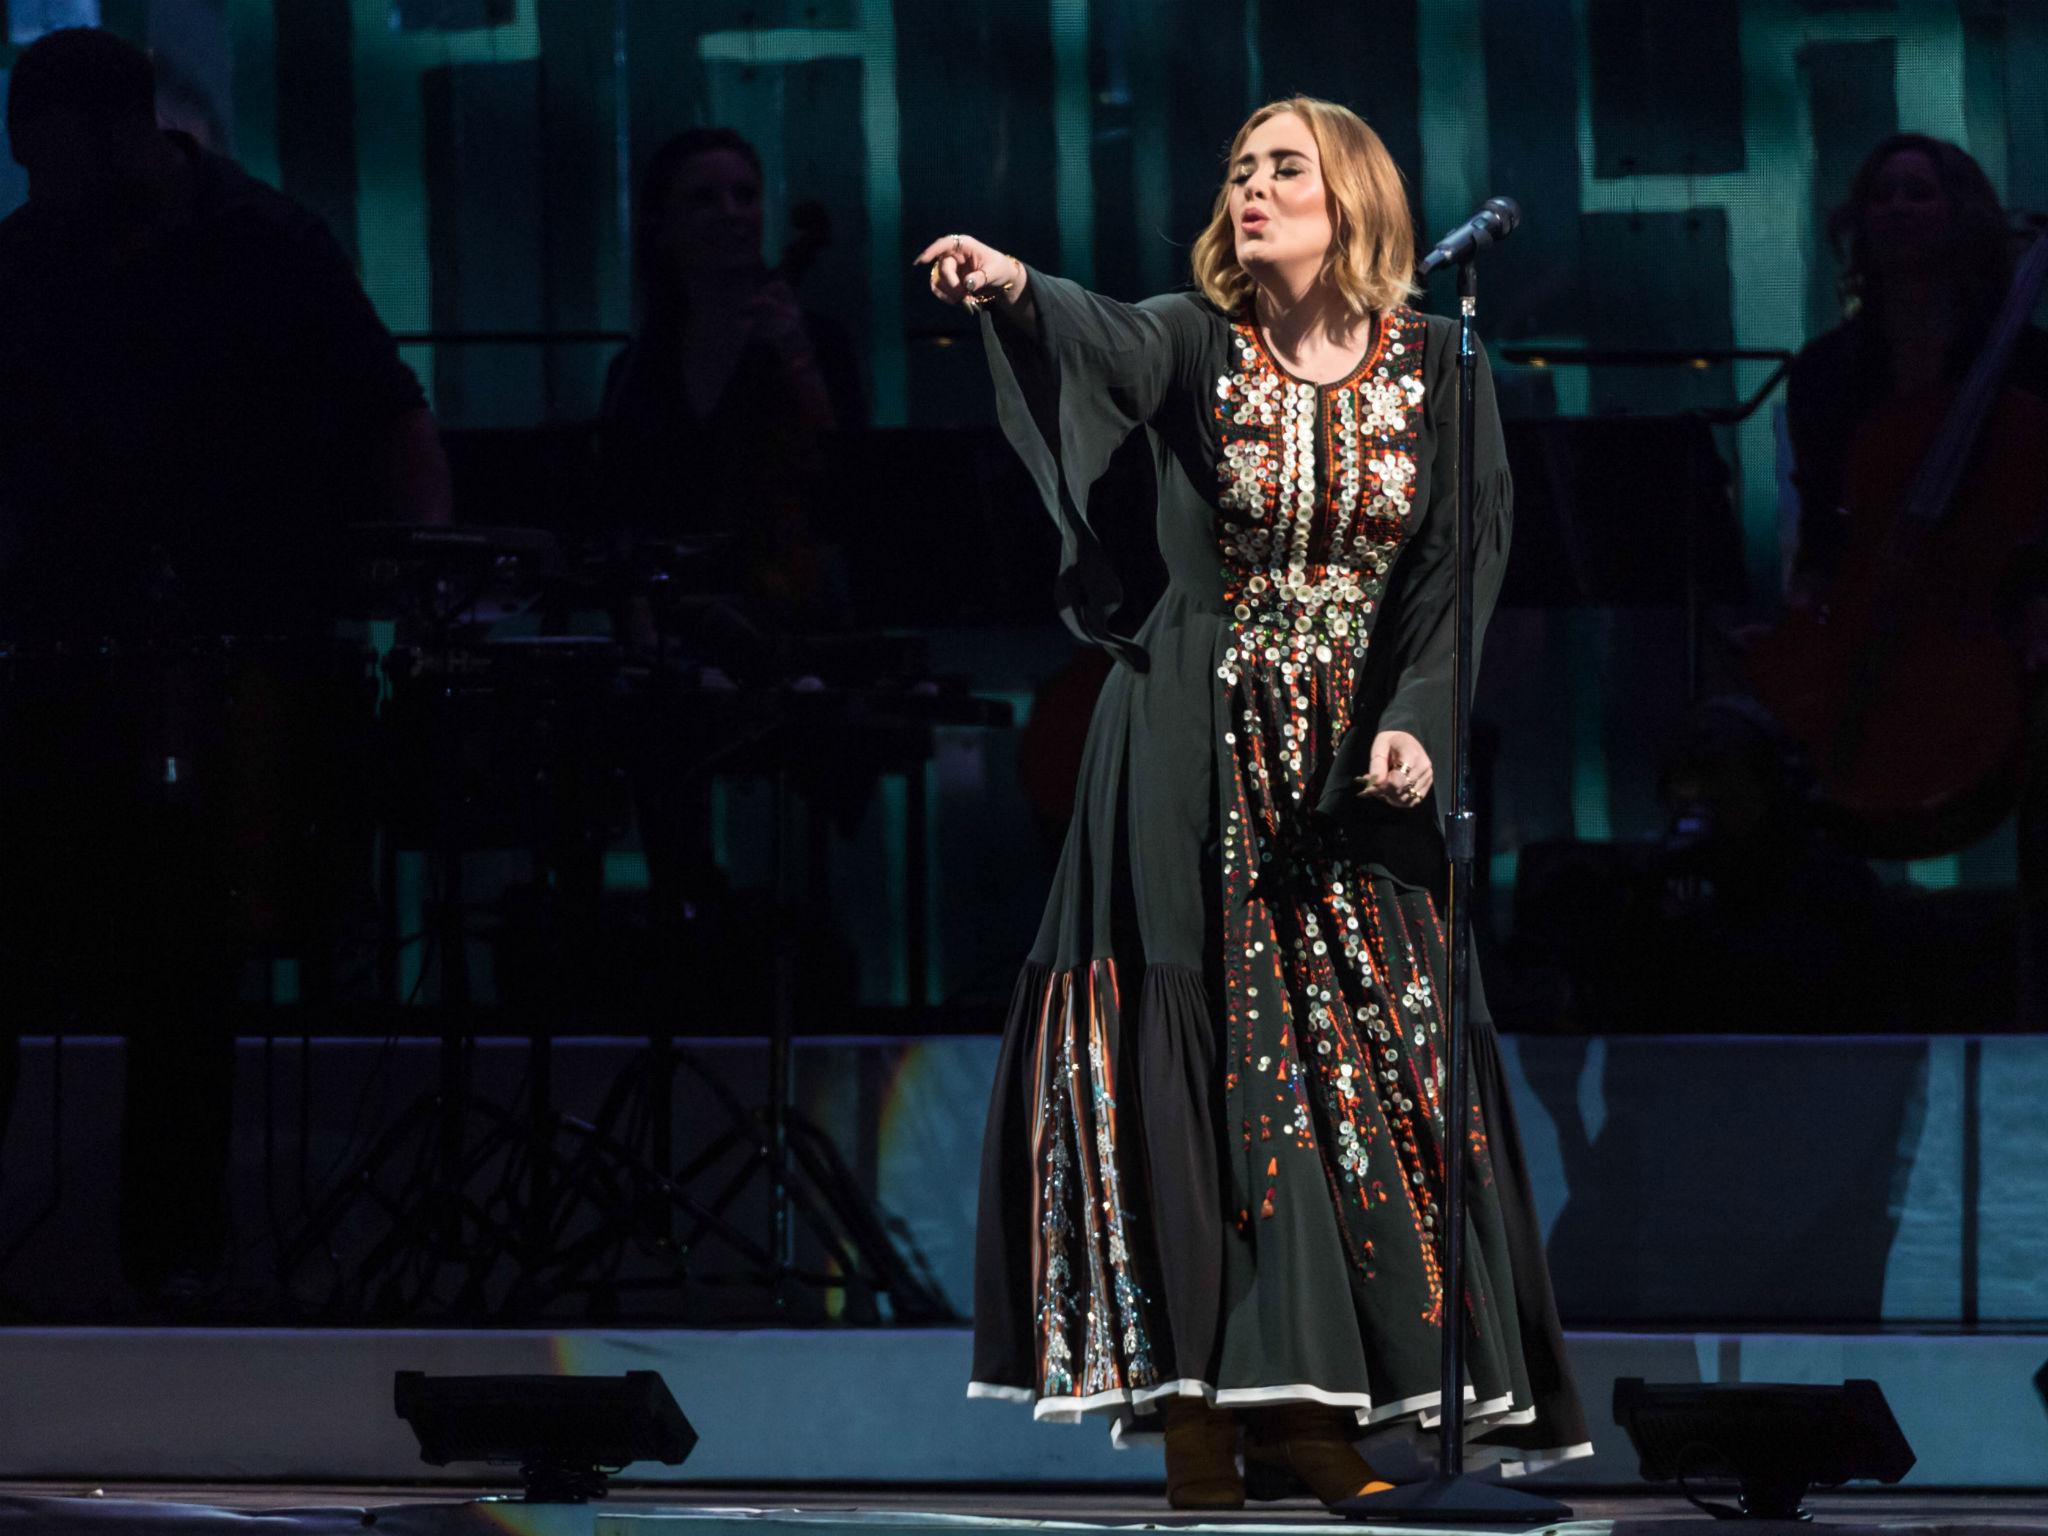 Adele's fans sing her hit songs back at her as she headlines Glastonbury's Pyramid Stage